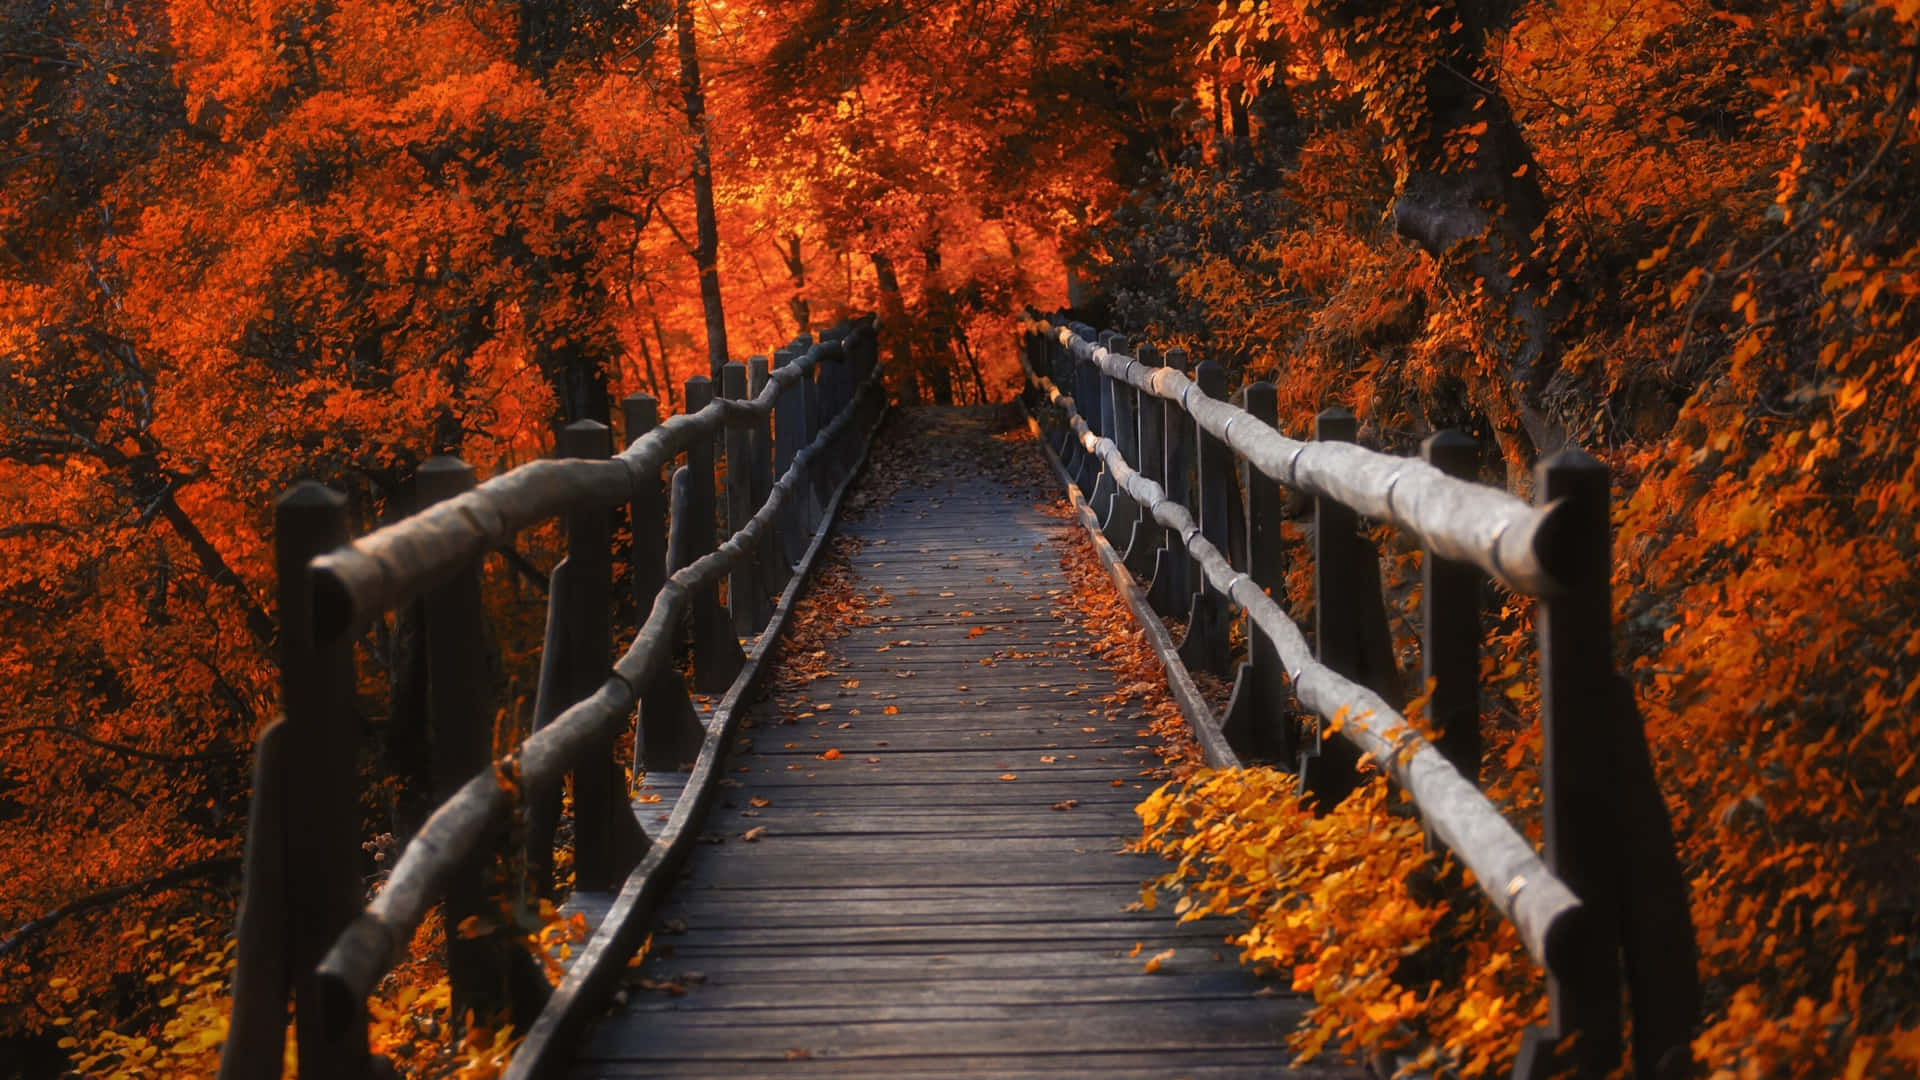 Have the perfect view of Autumn with this 3840 X 2160 wallpaper Wallpaper